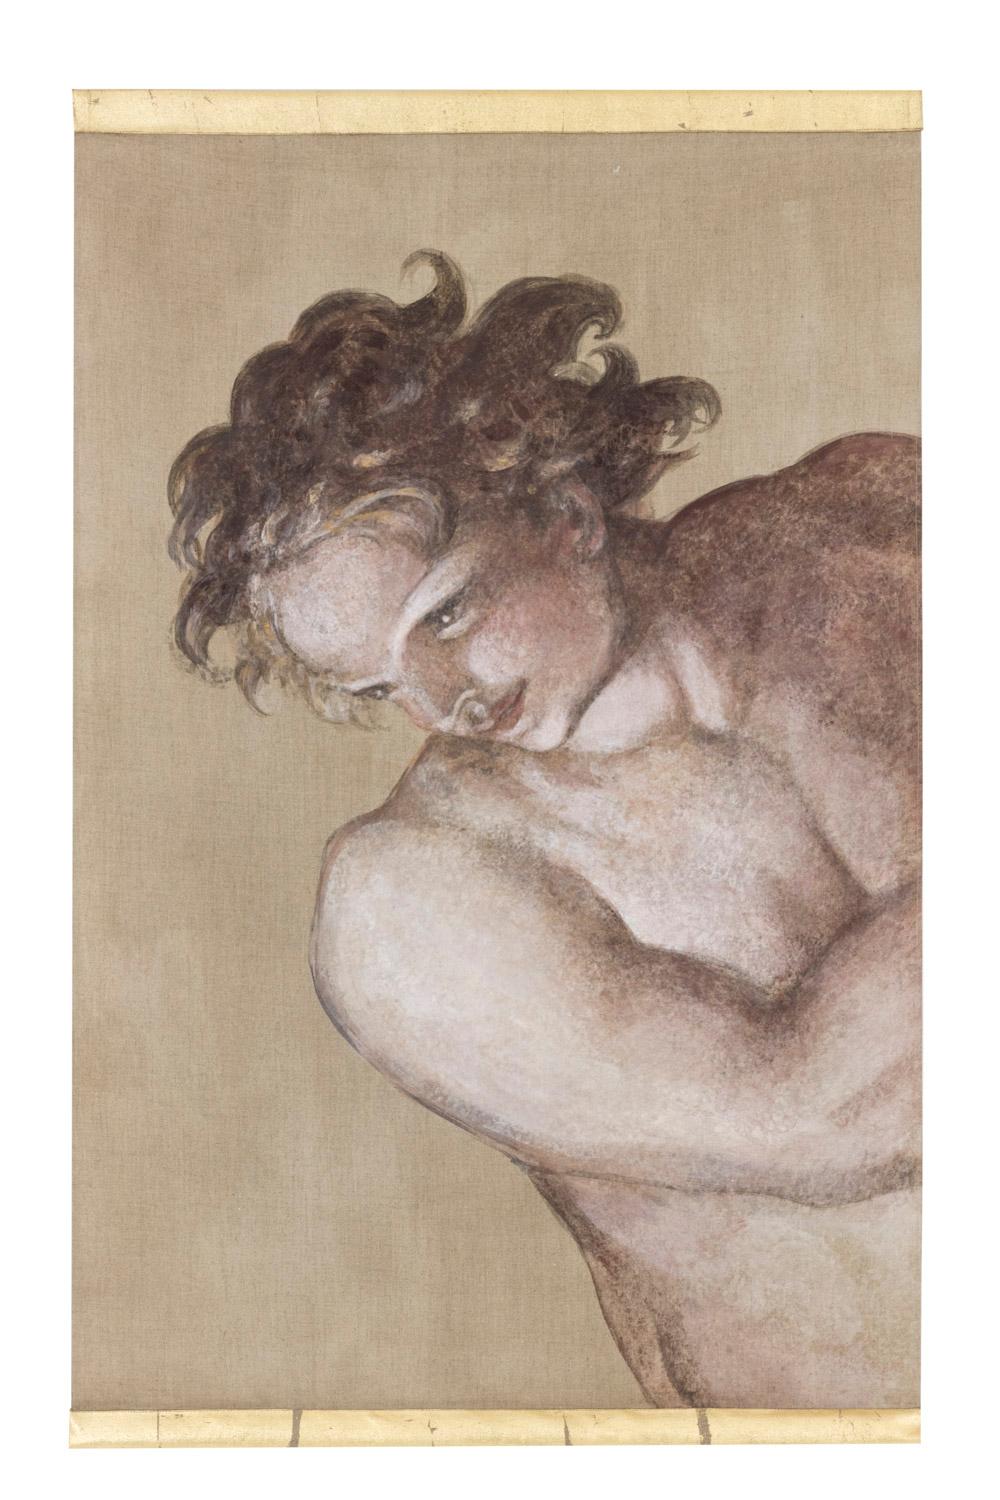 Painted canvas figuring a man in the Michelangelo style, side view. He is naked with muscles reminding the one from the Italian Renaissance painting, he has curly hairs and turns the head to the bottom left. Brown background.

Linen raw canvas